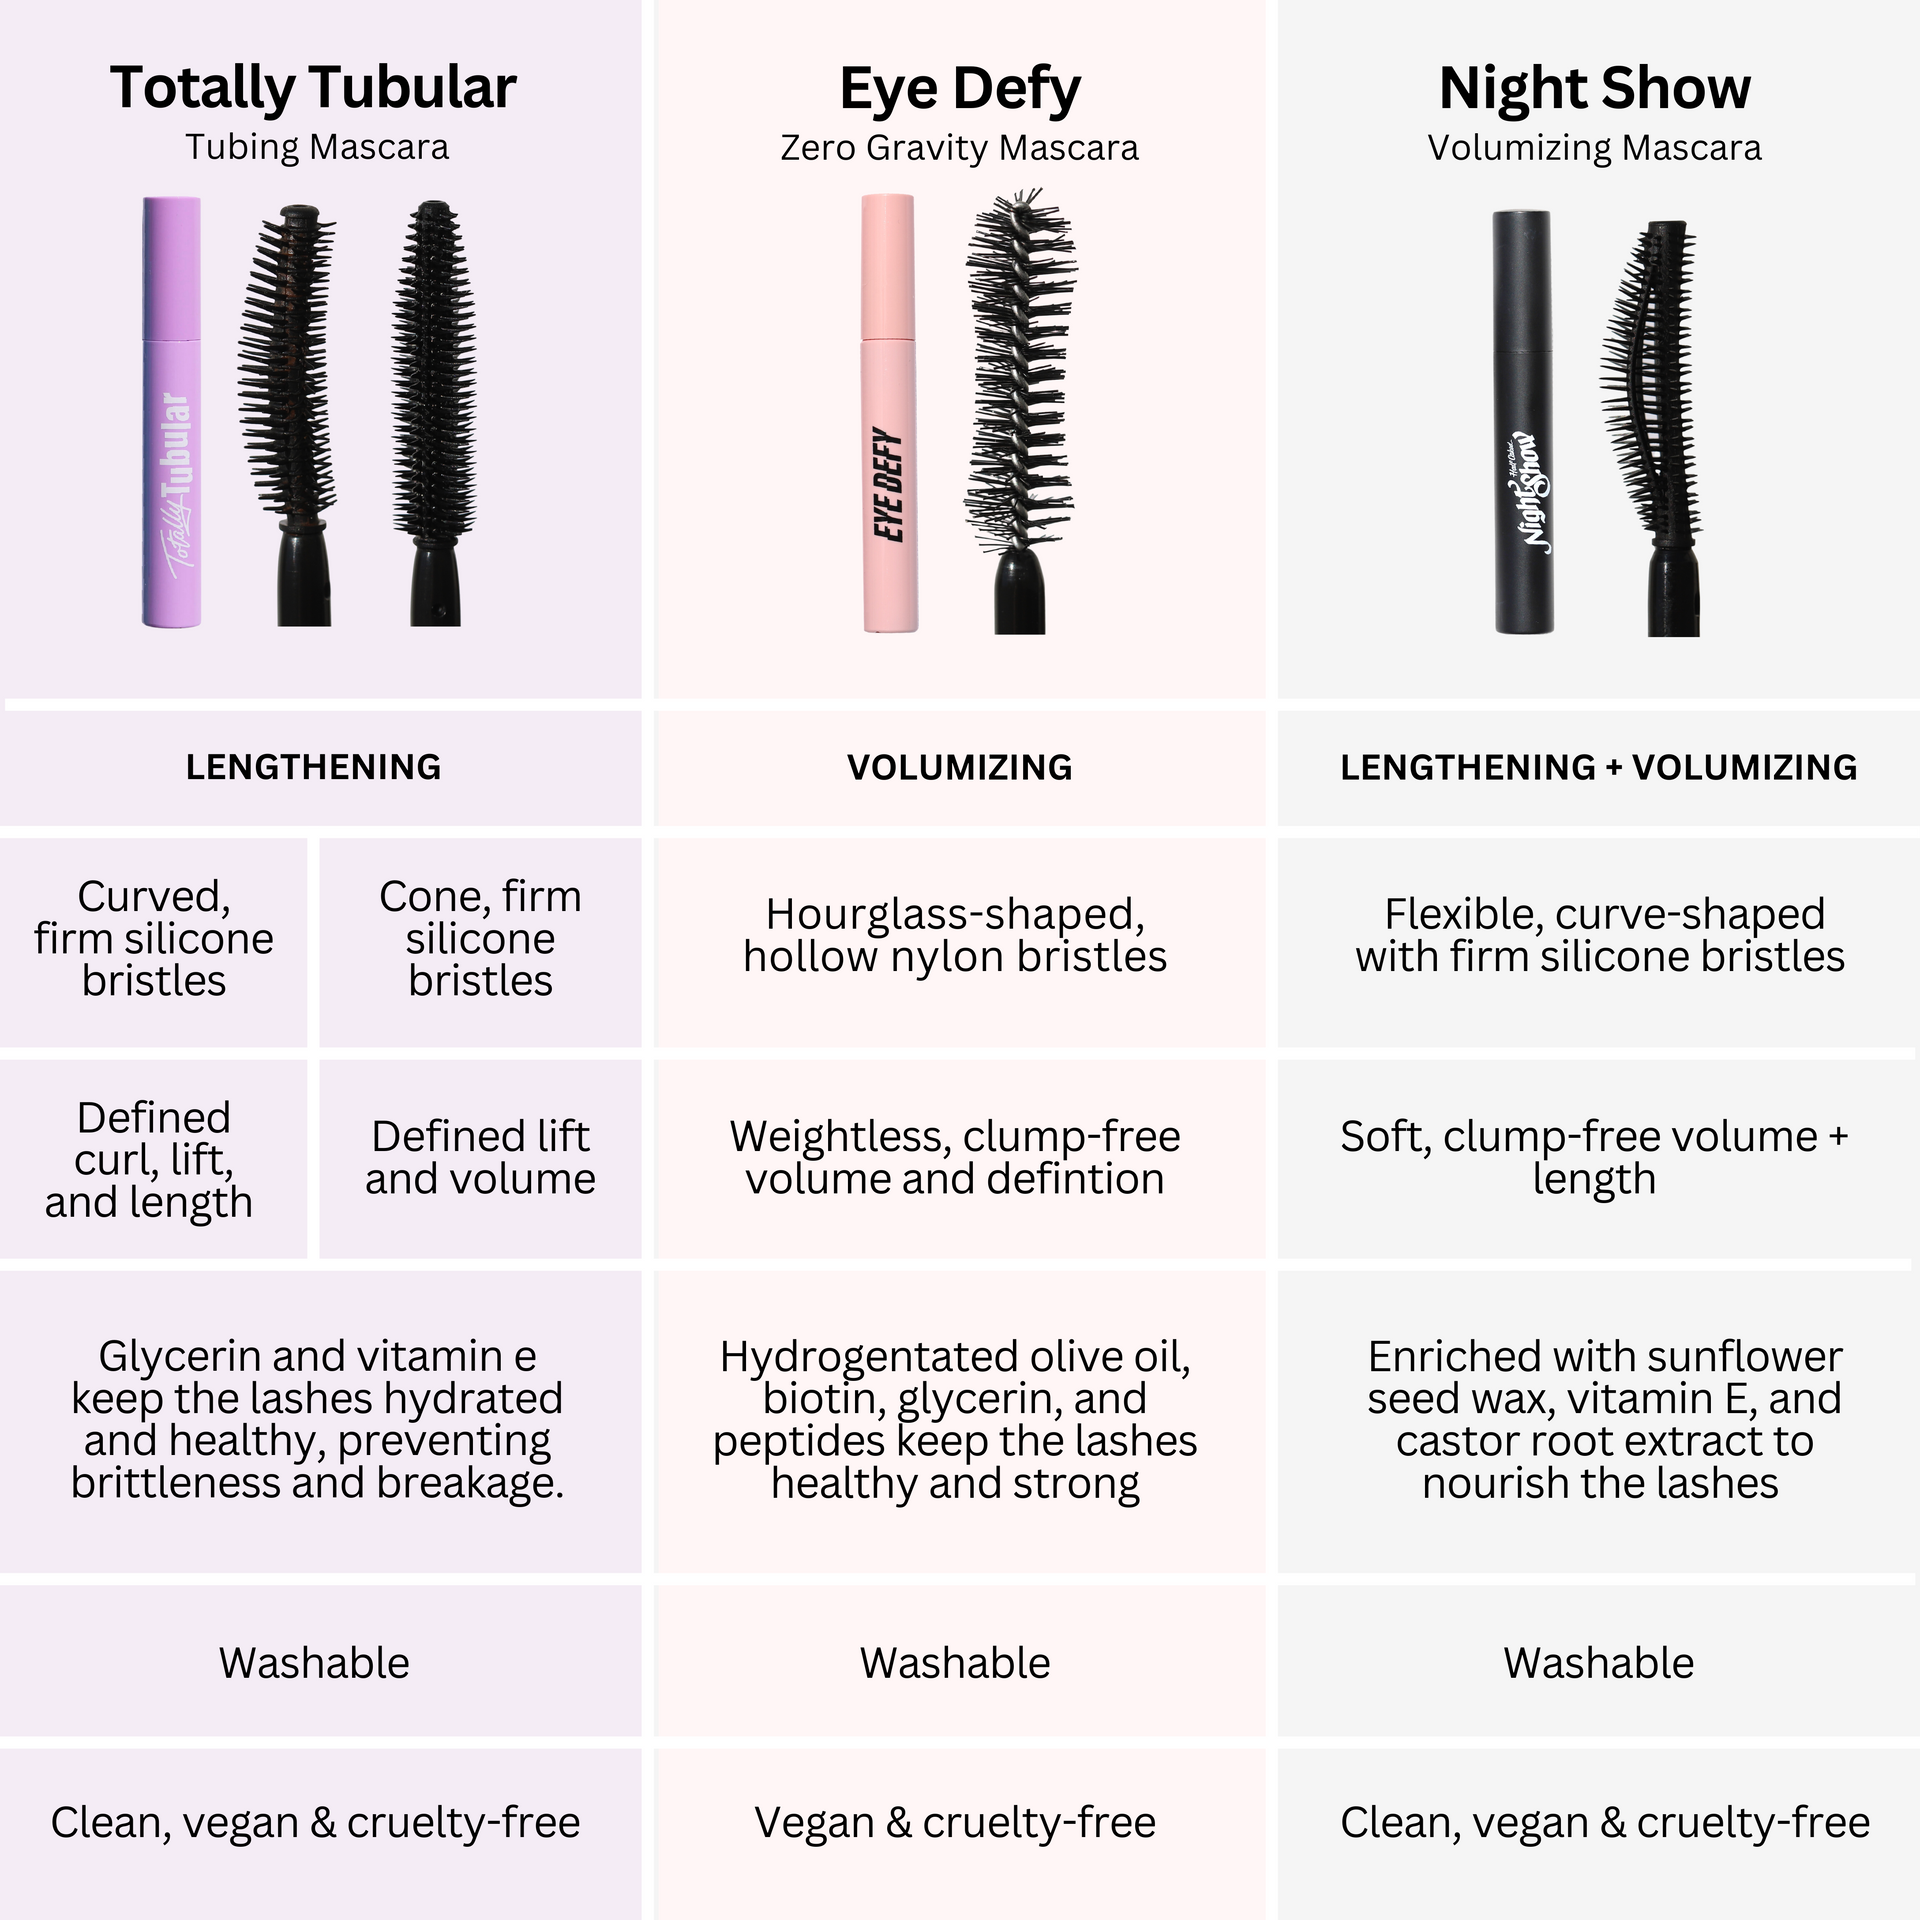 Comparison chart showcasing three mascaras: 'Totally Tubular Tubing Mascara' with curved and cone-shaped silicone bristles for lengthening, 'Eye Defy Zero Gravity Mascara' with hourglass-shaped nylon bristles for volumizing, and 'Night Show Volumizing Mascara' with flexible, curve-shaped silicone bristles for lengthening and volumizing. Each mascara highlights features such as defined curl, lift, length, volume, hydration, and washability. All products are vegan and cruelty-free.